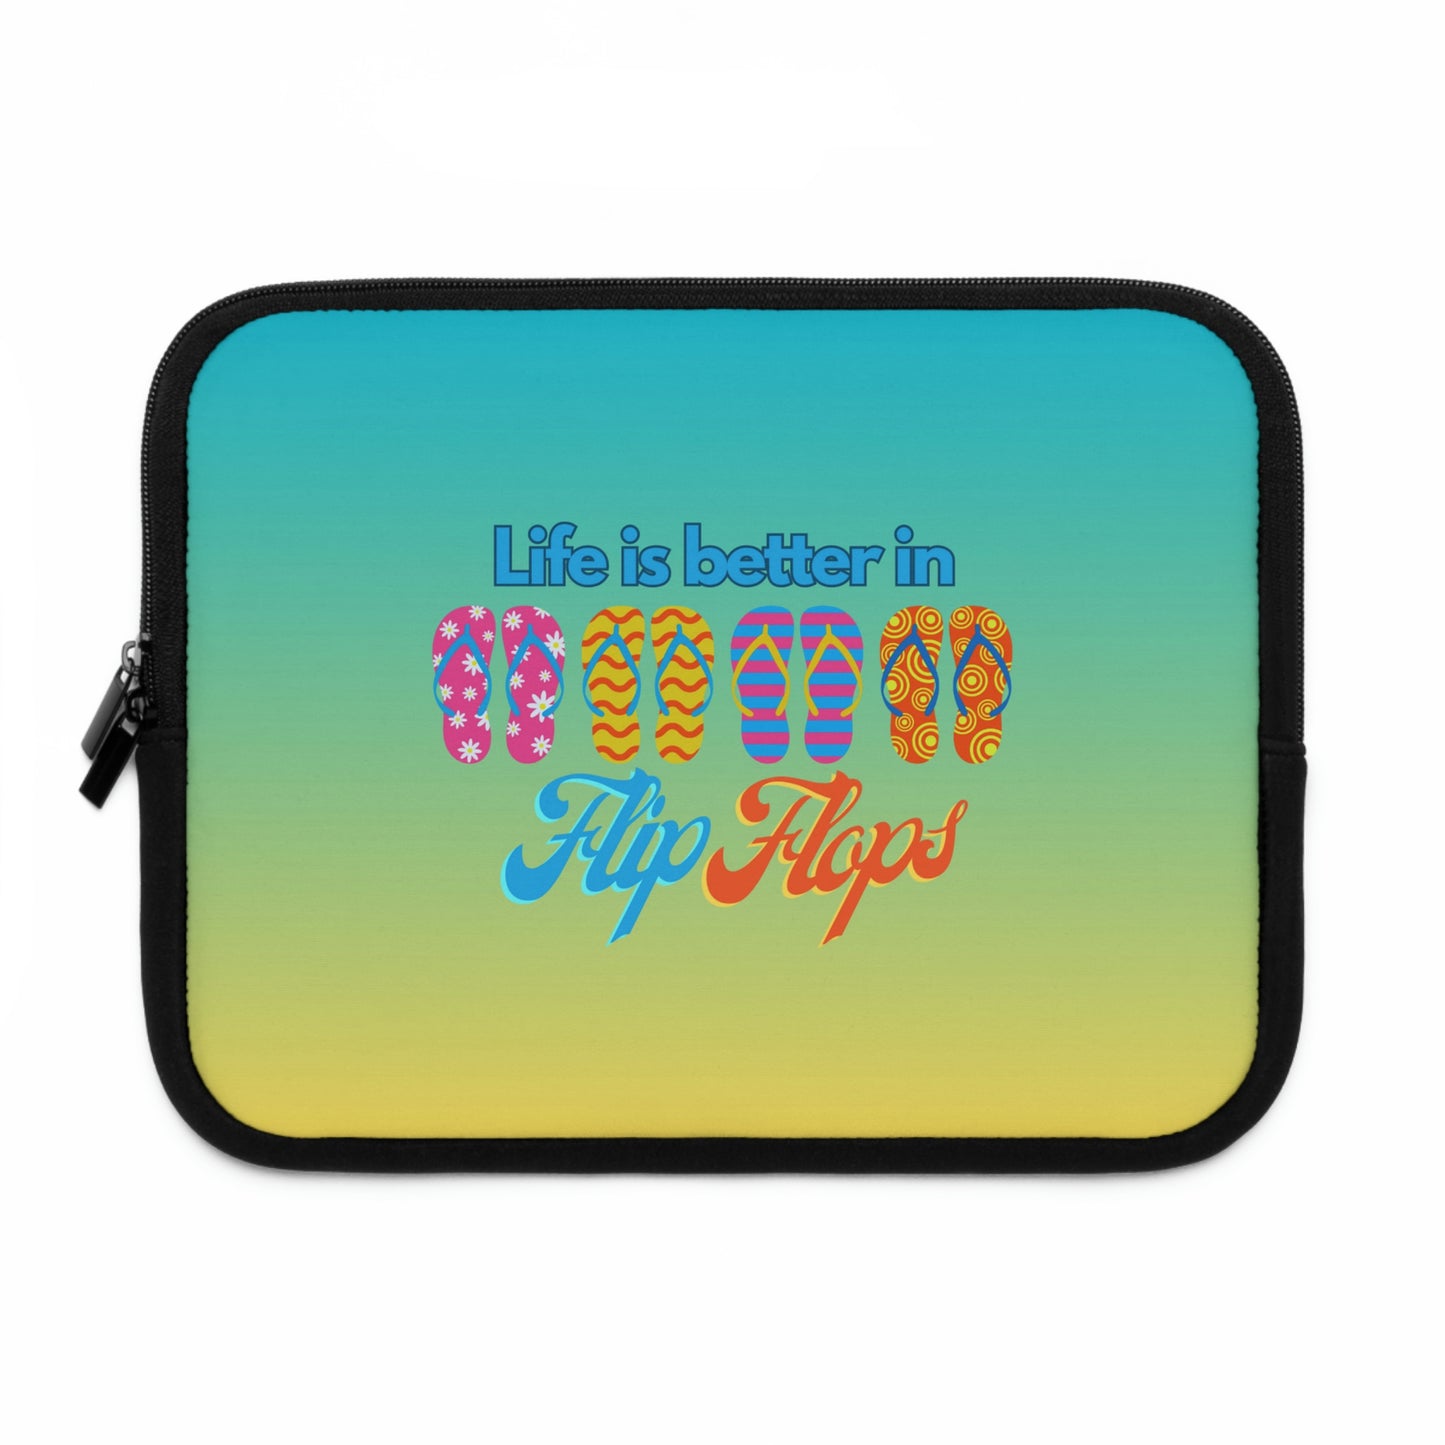 Life is Better in Flip Flops Compact Tote Bag